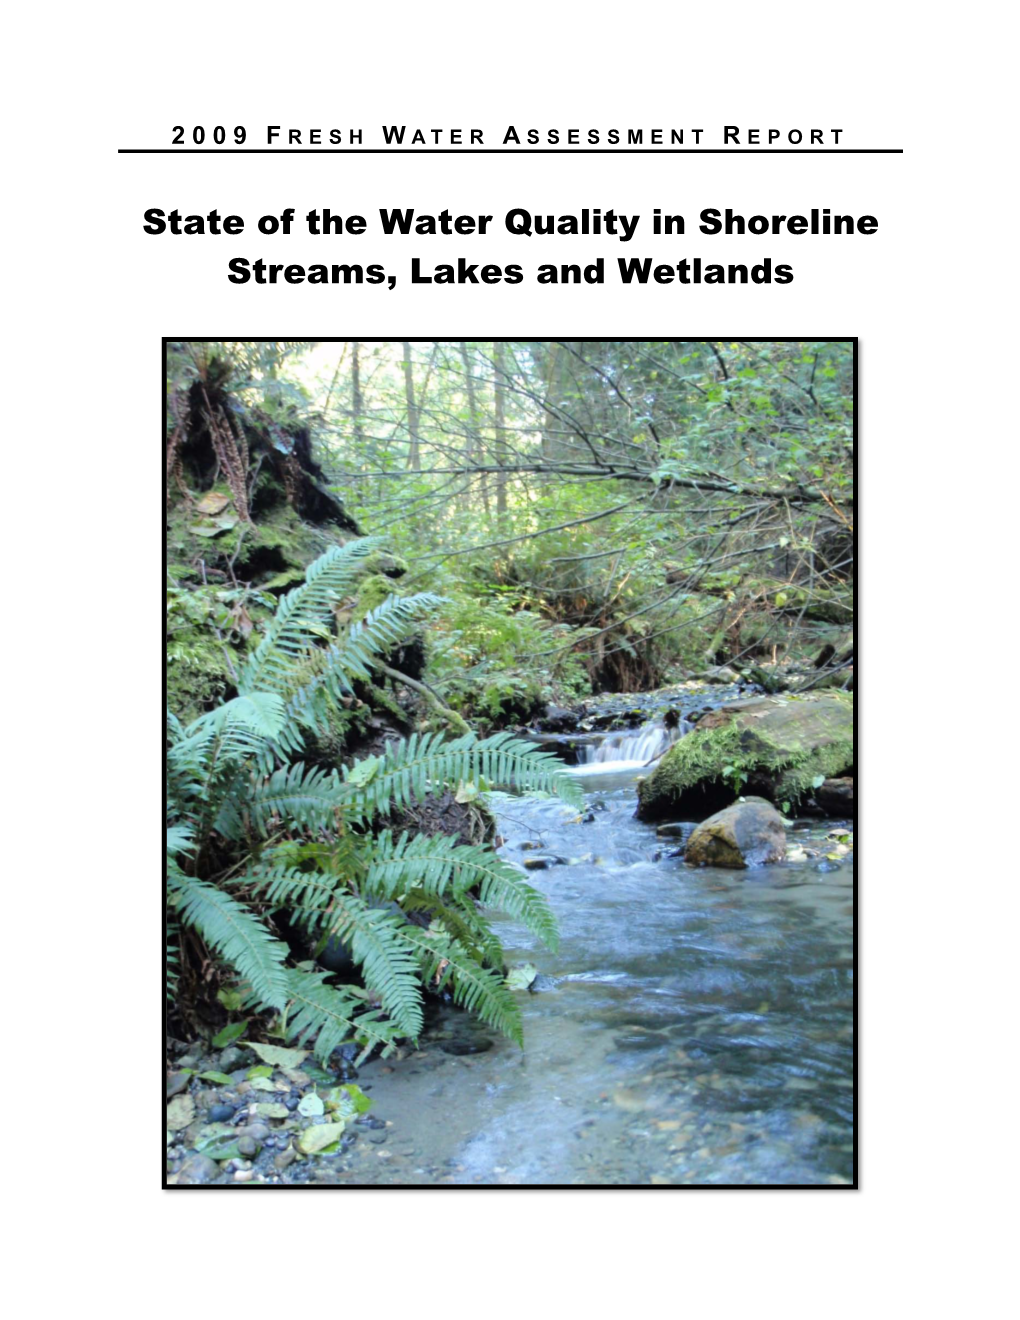 State of the Water Quality in Shoreline Streams, Lakes and Wetlands